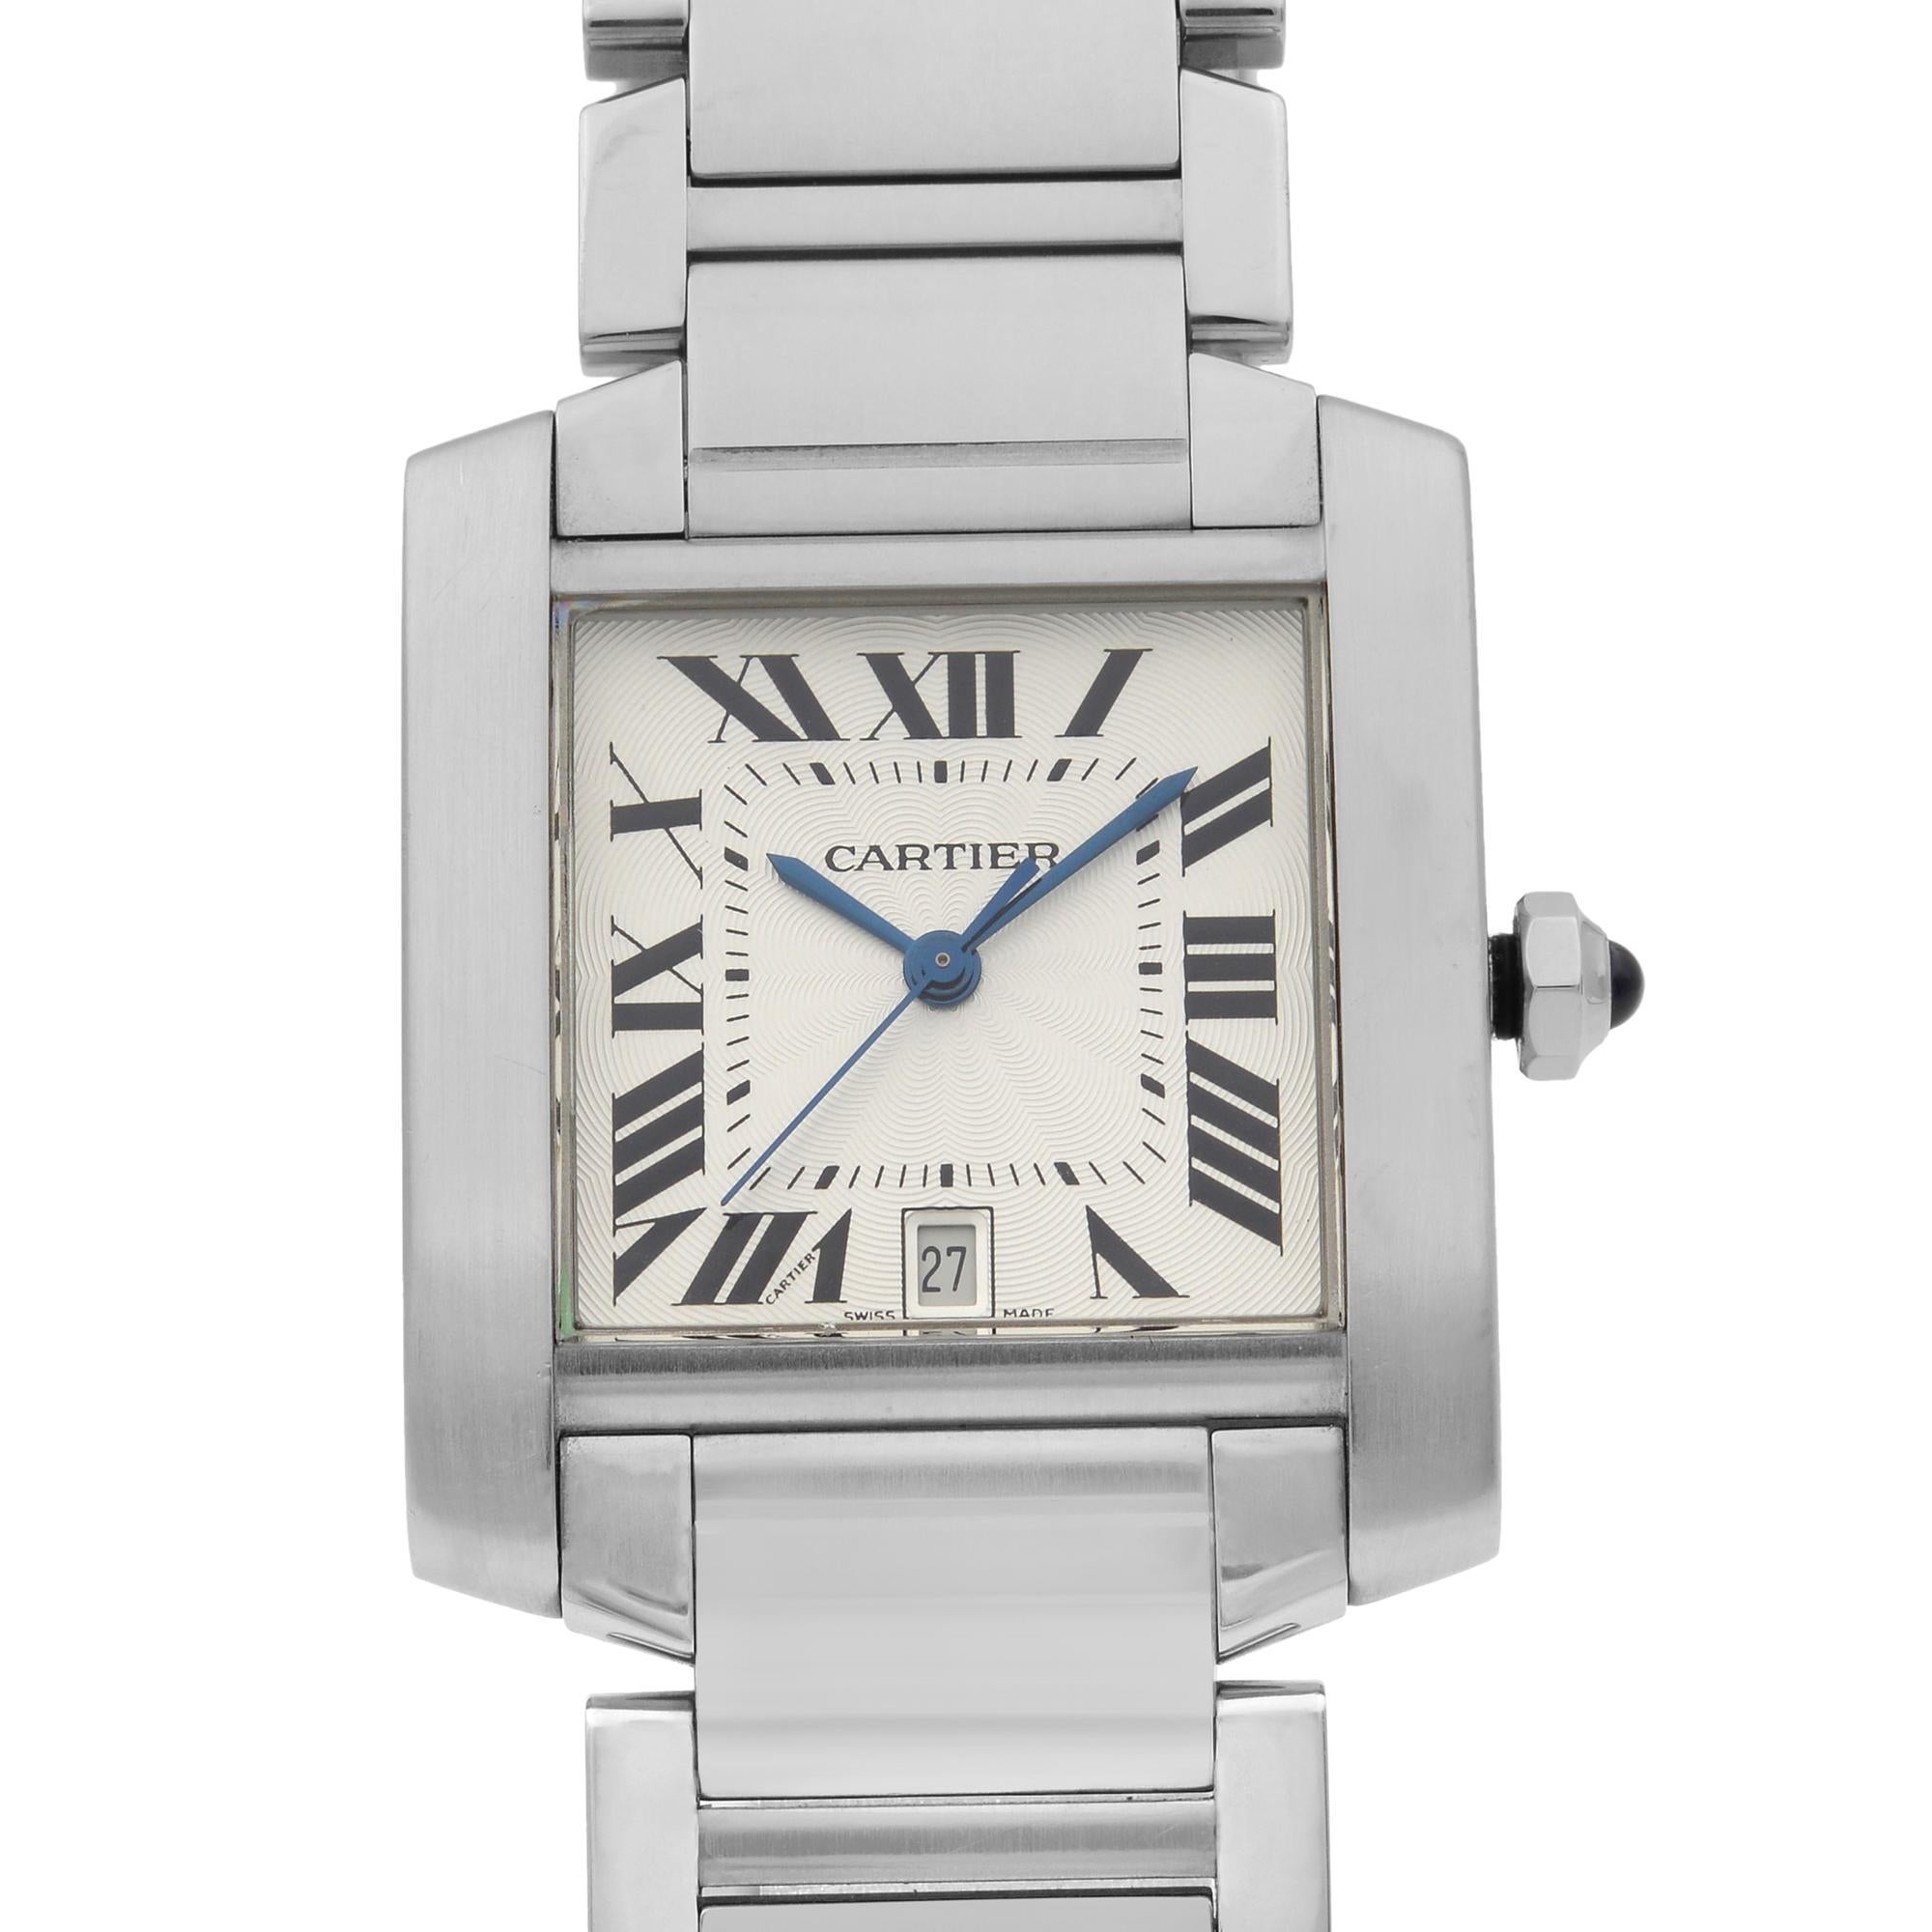 This pre-owned Cartier Tank W51002Q3 is a beautiful men's timepiece that is powered by mechanical (automatic) movement which is cased in a stainless steel case. It has a  rectangle shape face, date indicator dial and has hand roman numerals style